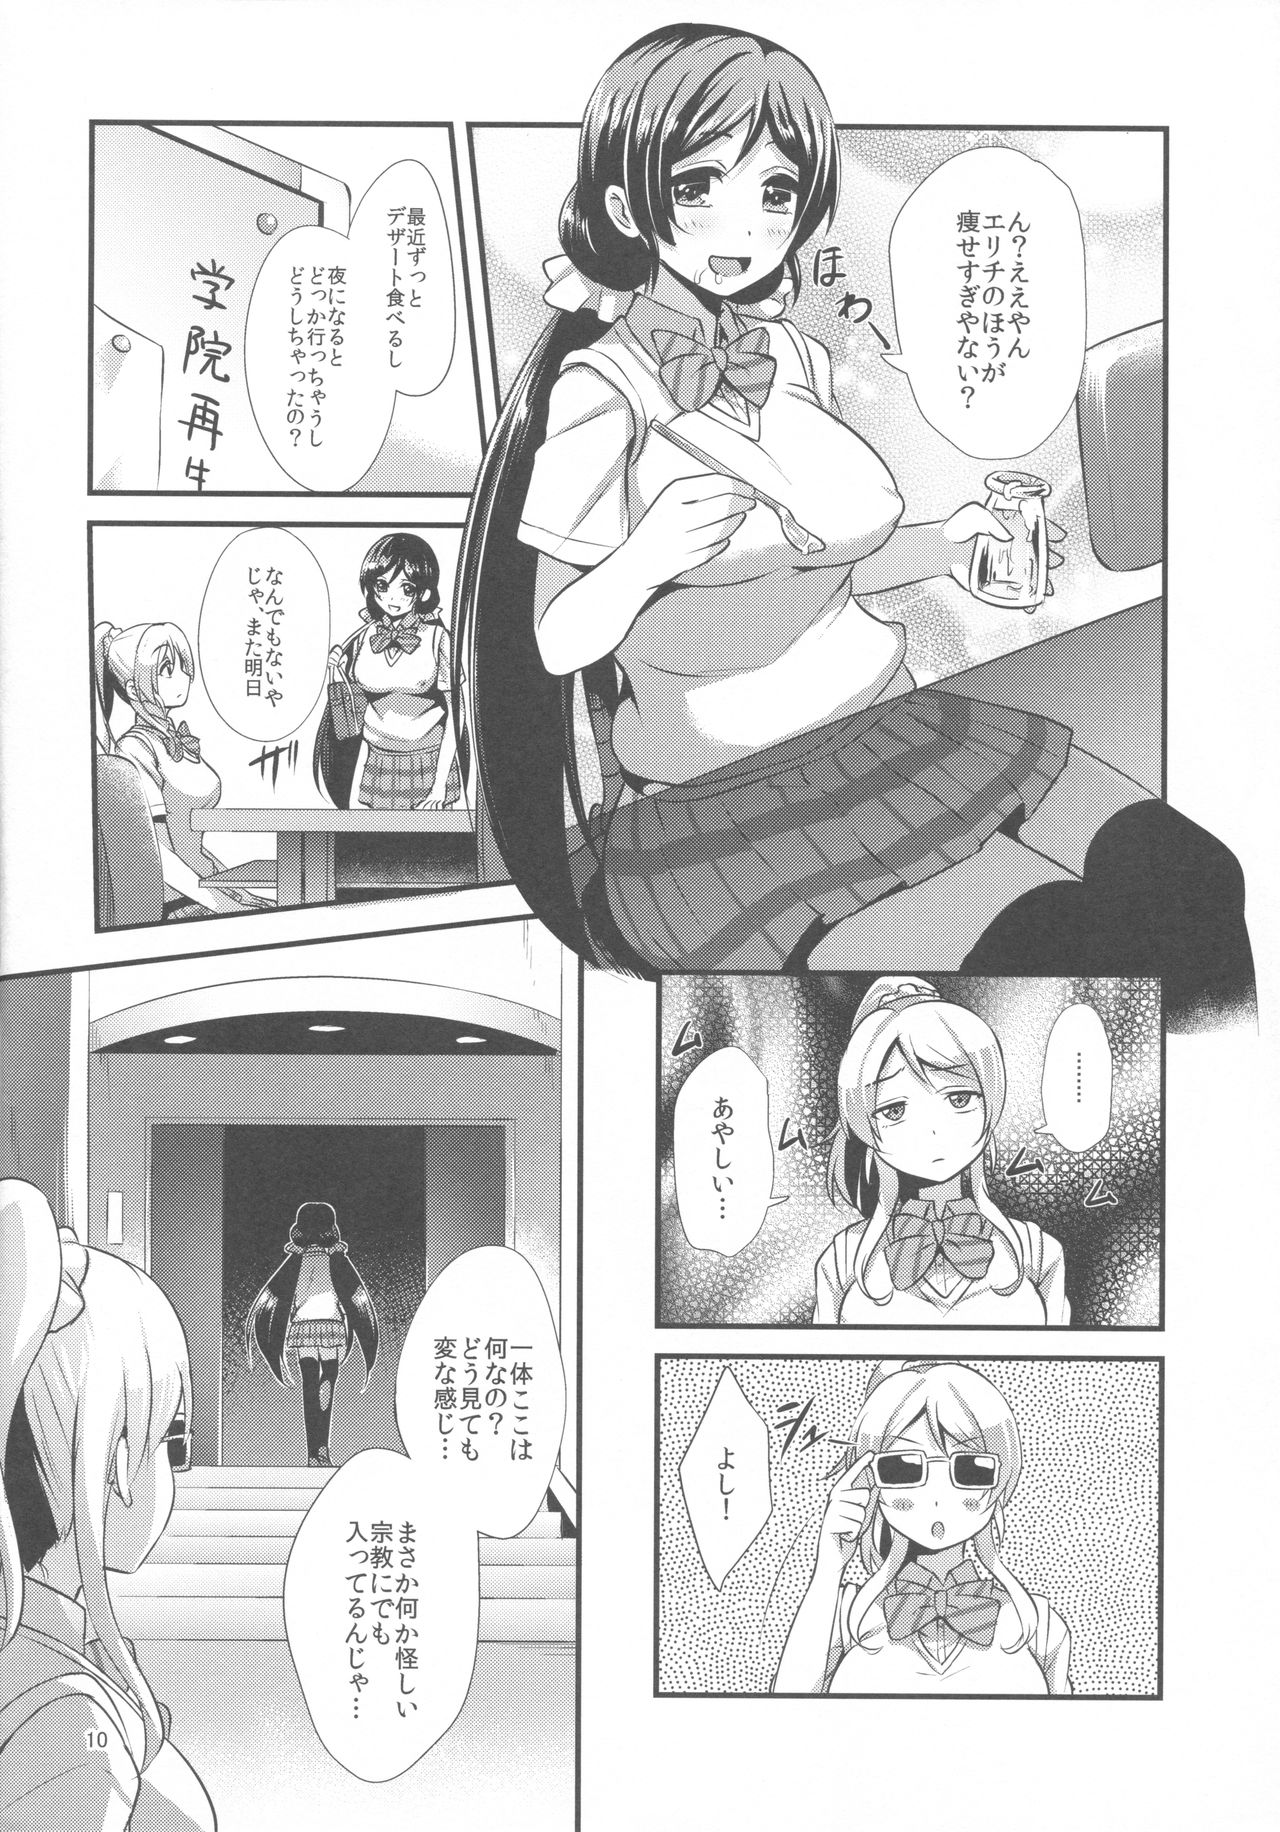 (C90) [chested (Tokupyon)] BAD END HEAVEN 4 (Love Live!) (C90) [chested (とくぴょん)] BAD END HEAVEN 4 (ラブライブ!)